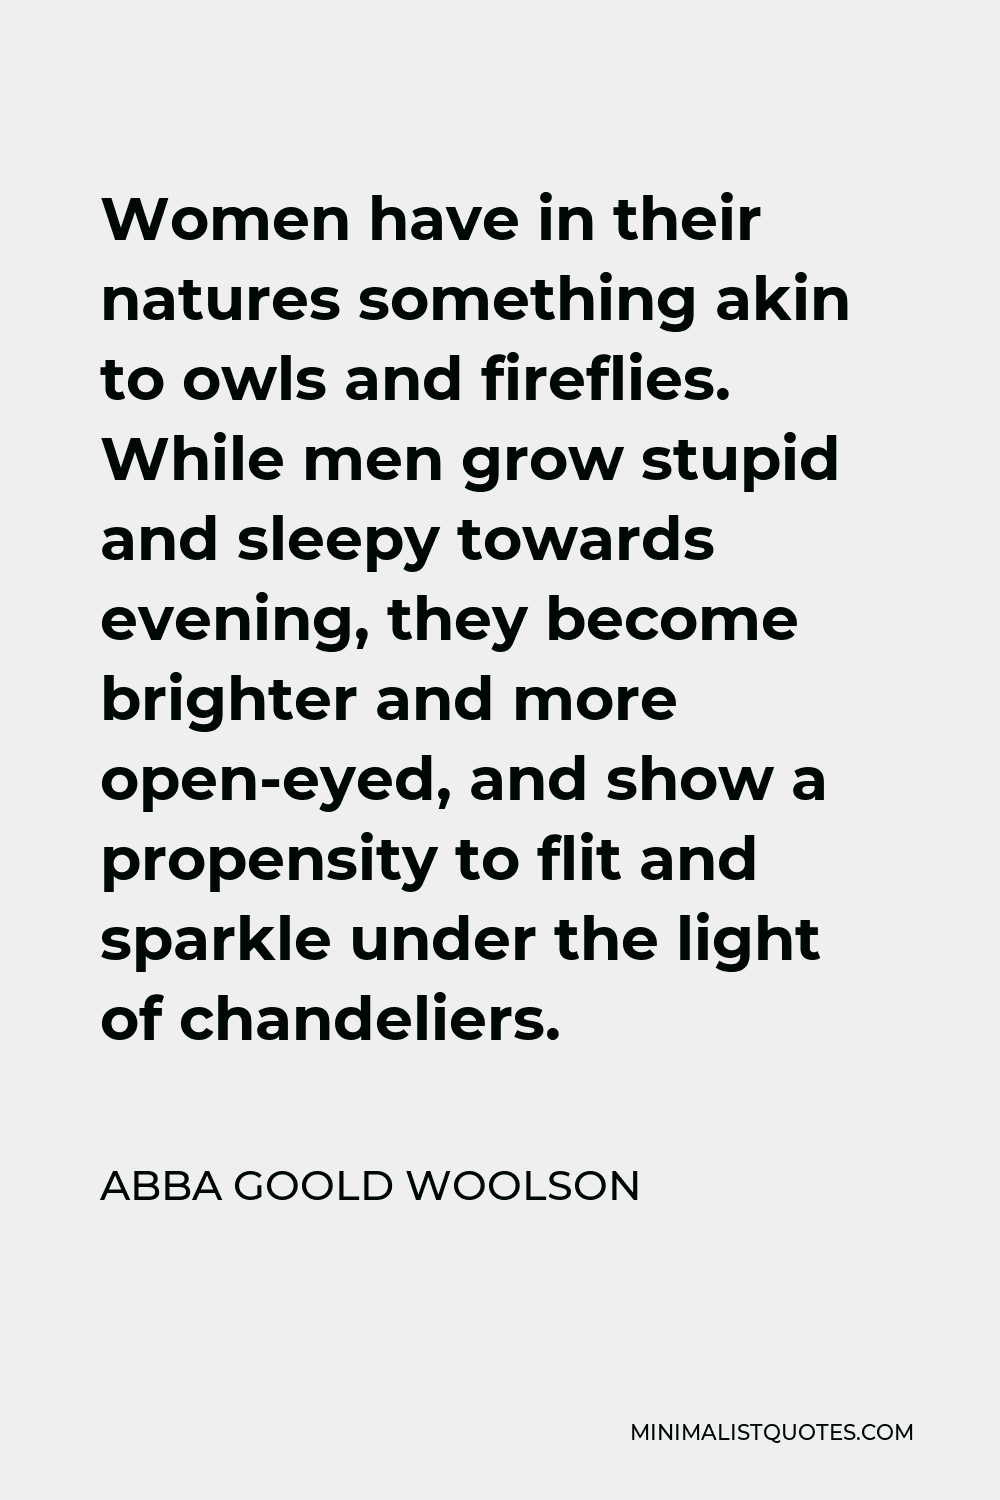 Abba Goold Woolson Quote - Women have in their natures something akin to owls and fireflies. While men grow stupid and sleepy towards evening, they become brighter and more open-eyed, and show a propensity to flit and sparkle under the light of chandeliers.